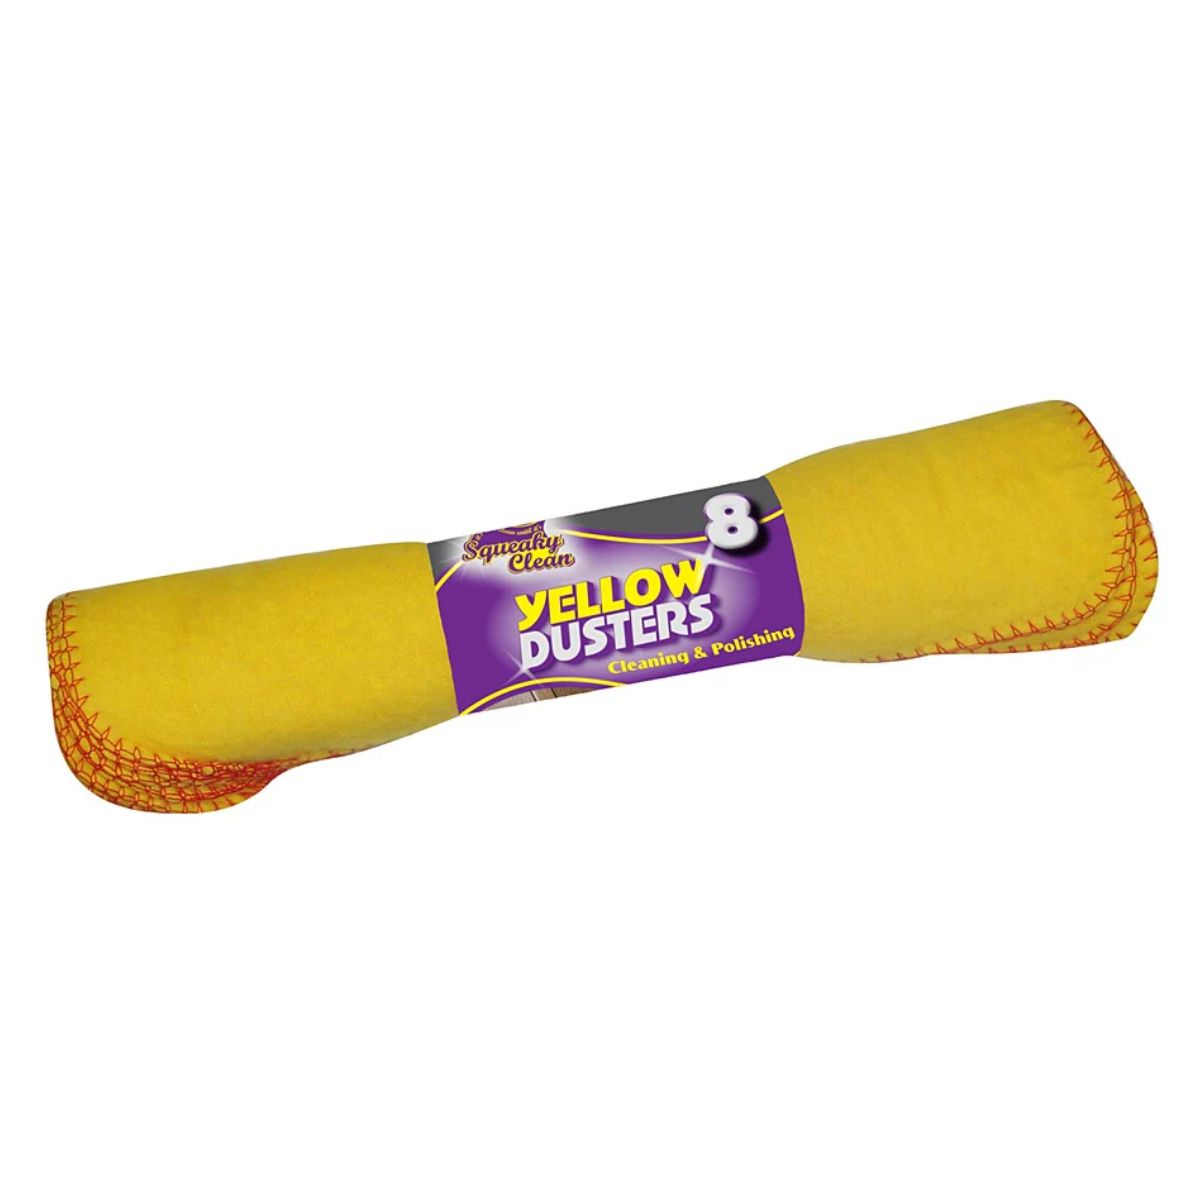 Pack of Ramon - Squeaky Clean Yellow Dusters - 8pcs with packaging designed to resemble a baseball bat.